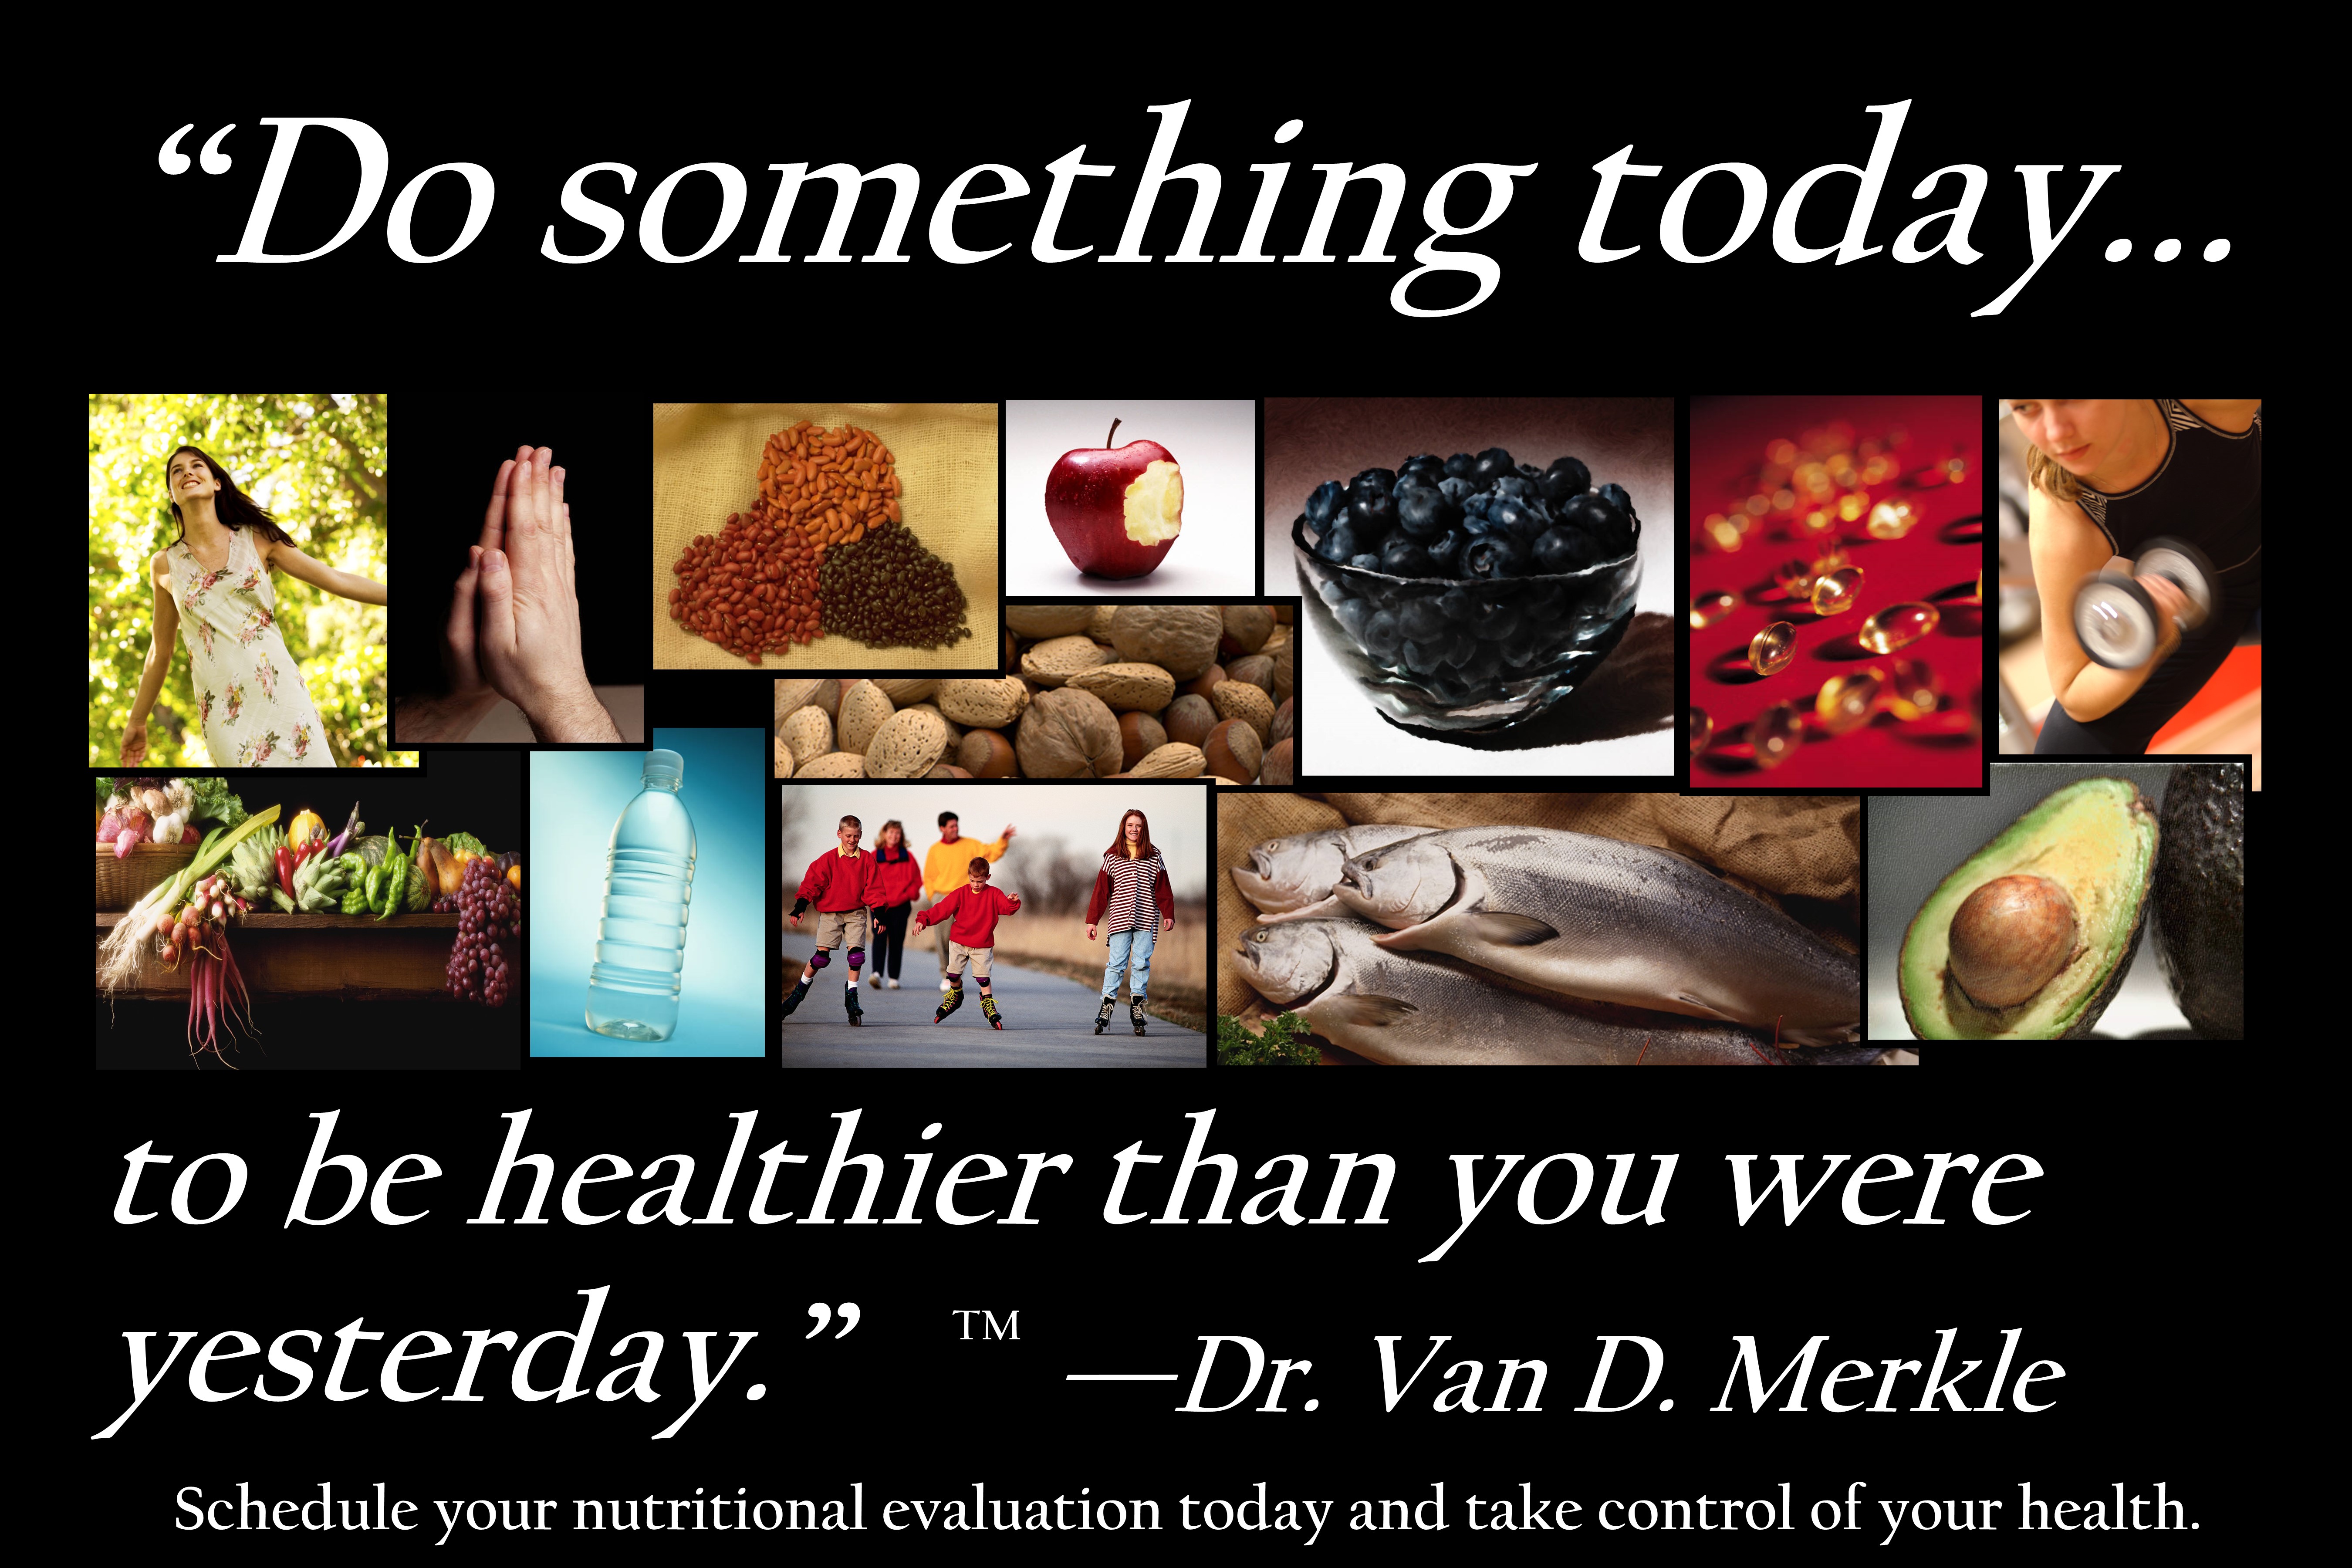 Do you want to restore your health or treat the disease?